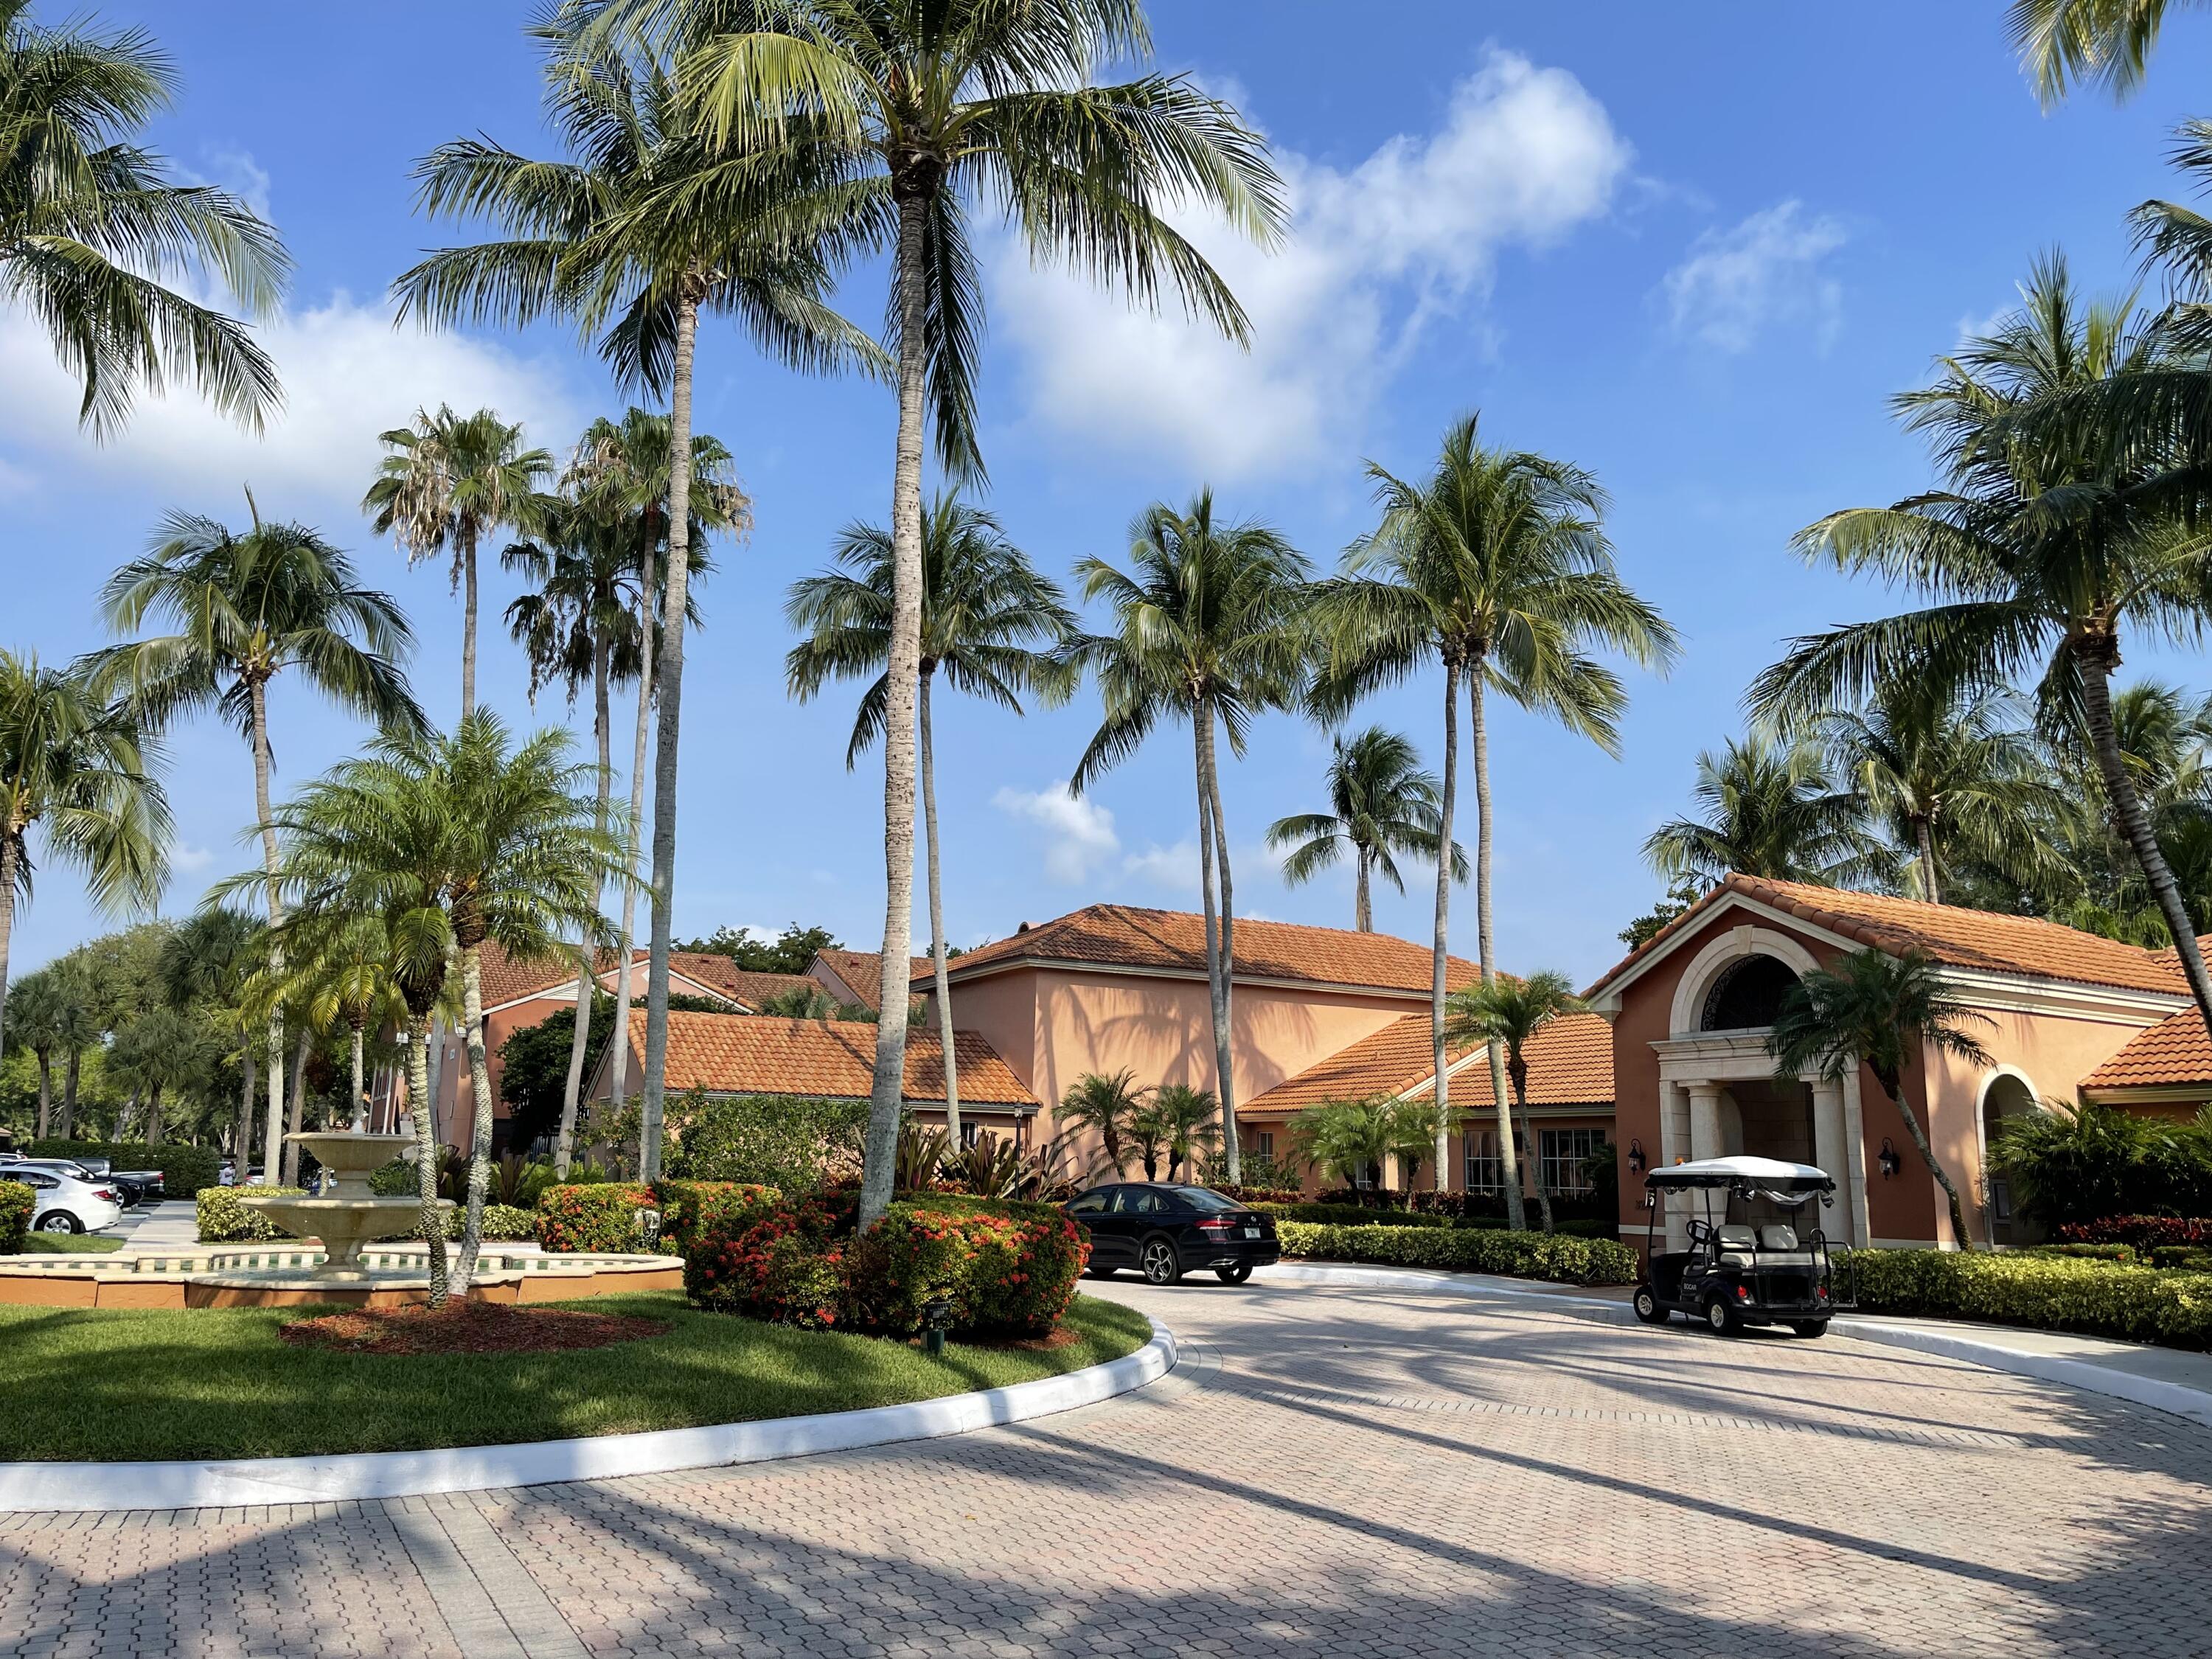 a view of multiple houses with palm trees